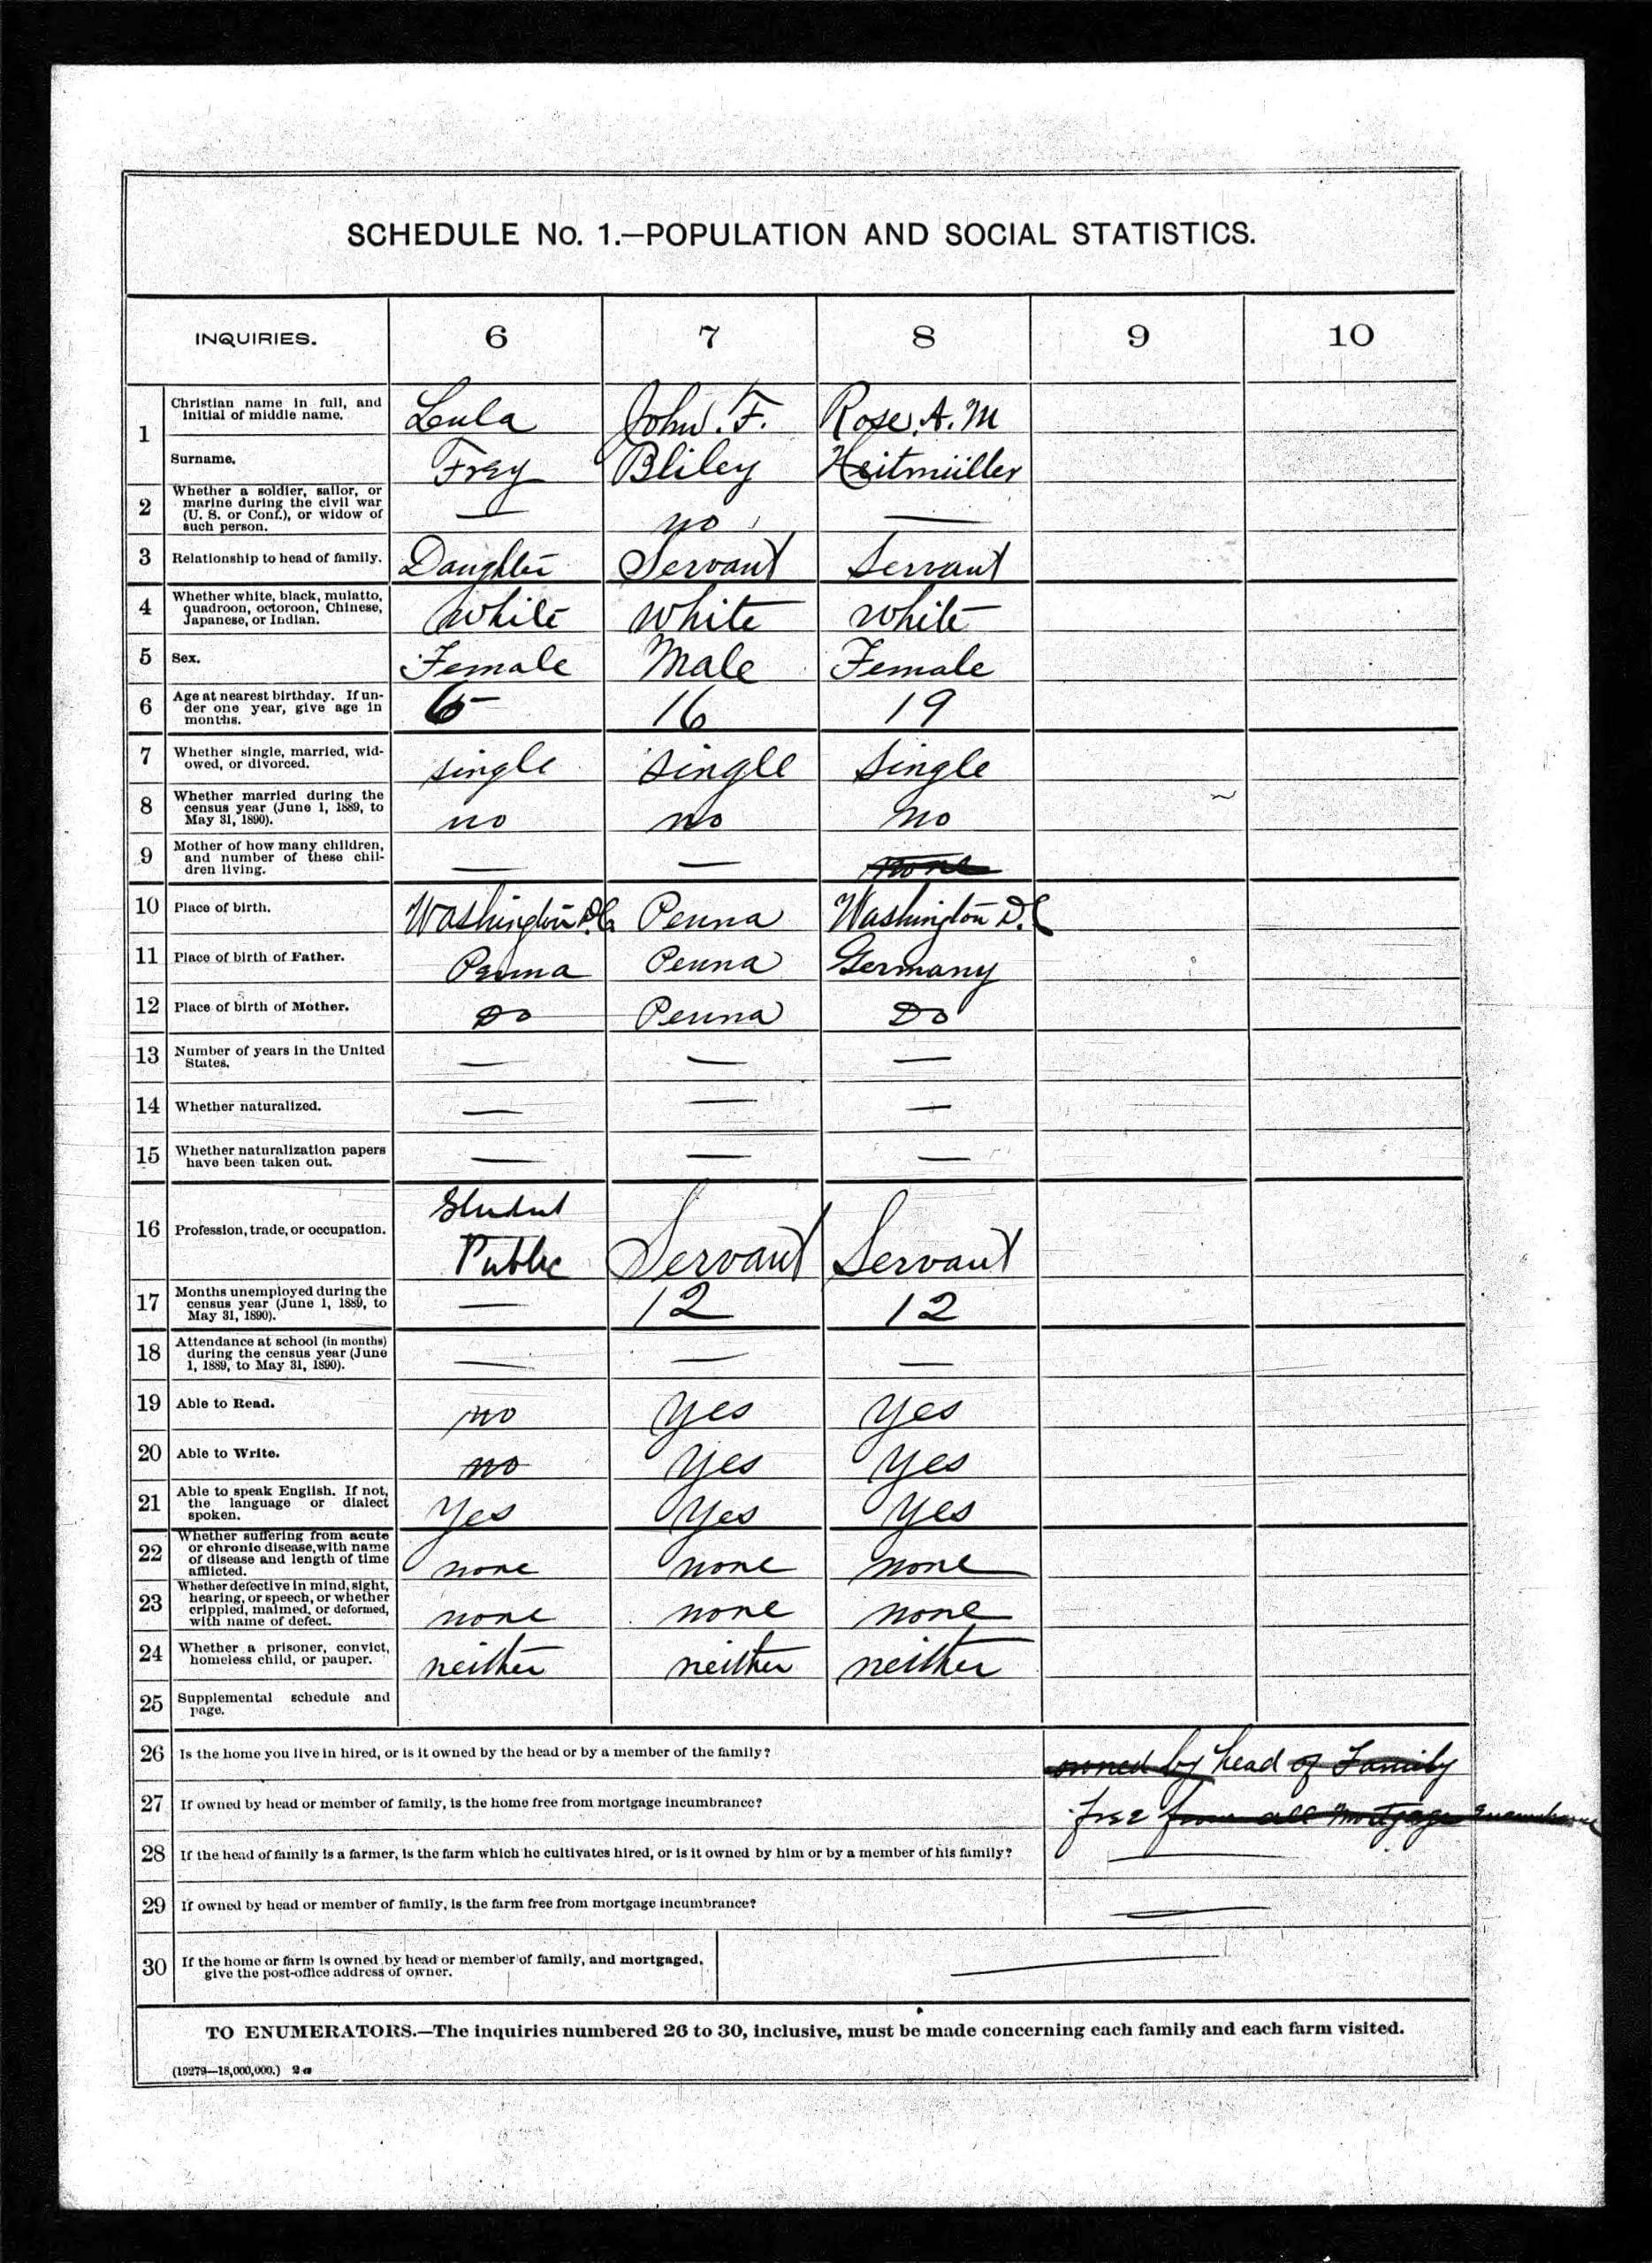 The Frey family in the 1890 U.S. Census (Ancestry.com)